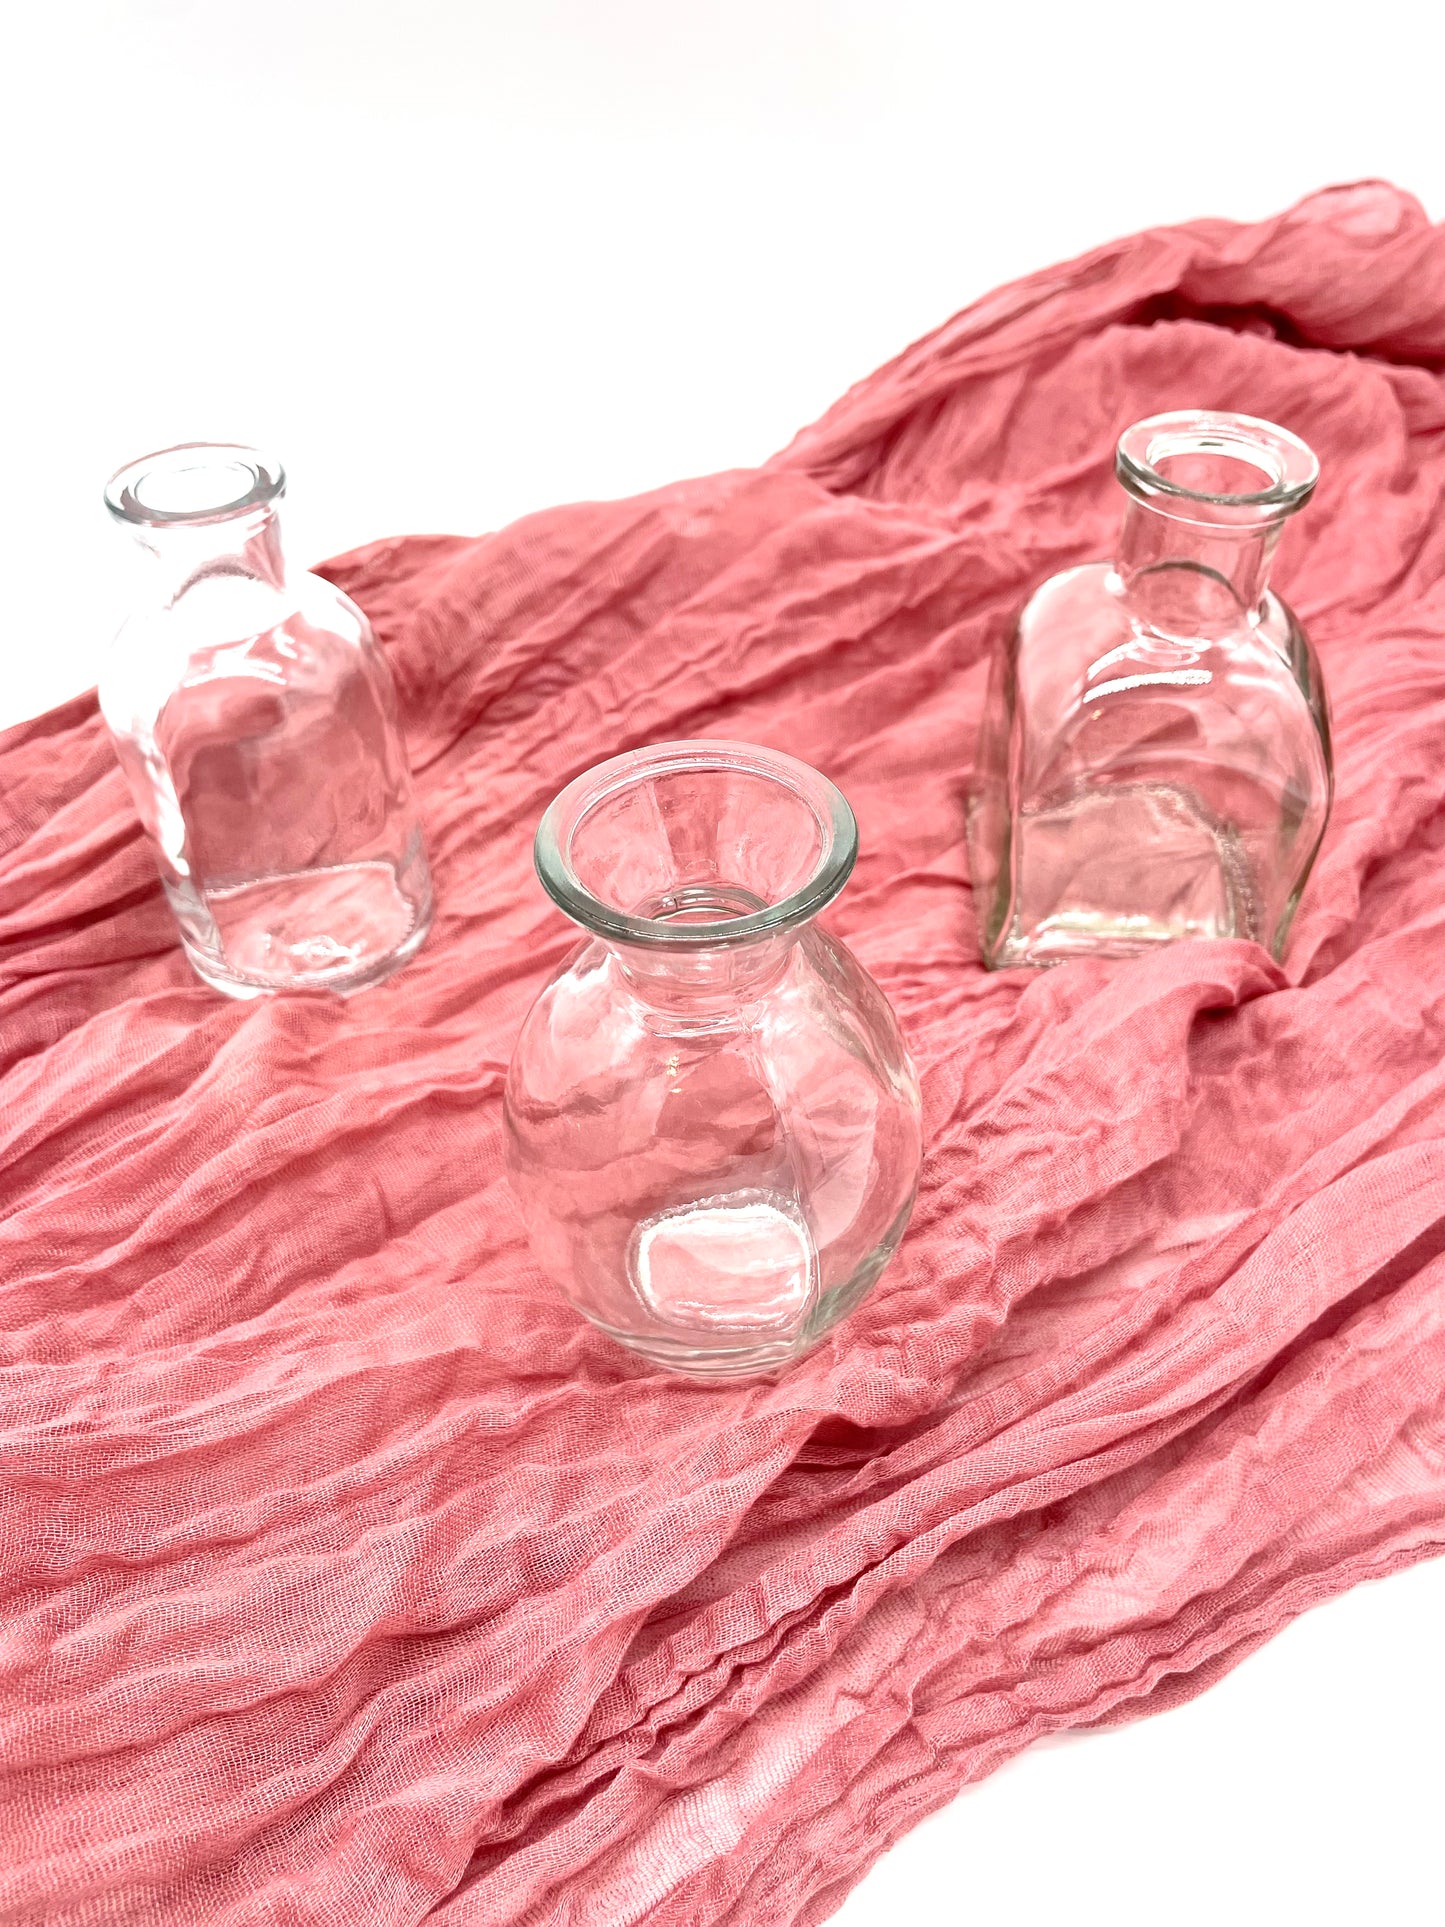 Bud Vases - Assorted Clear